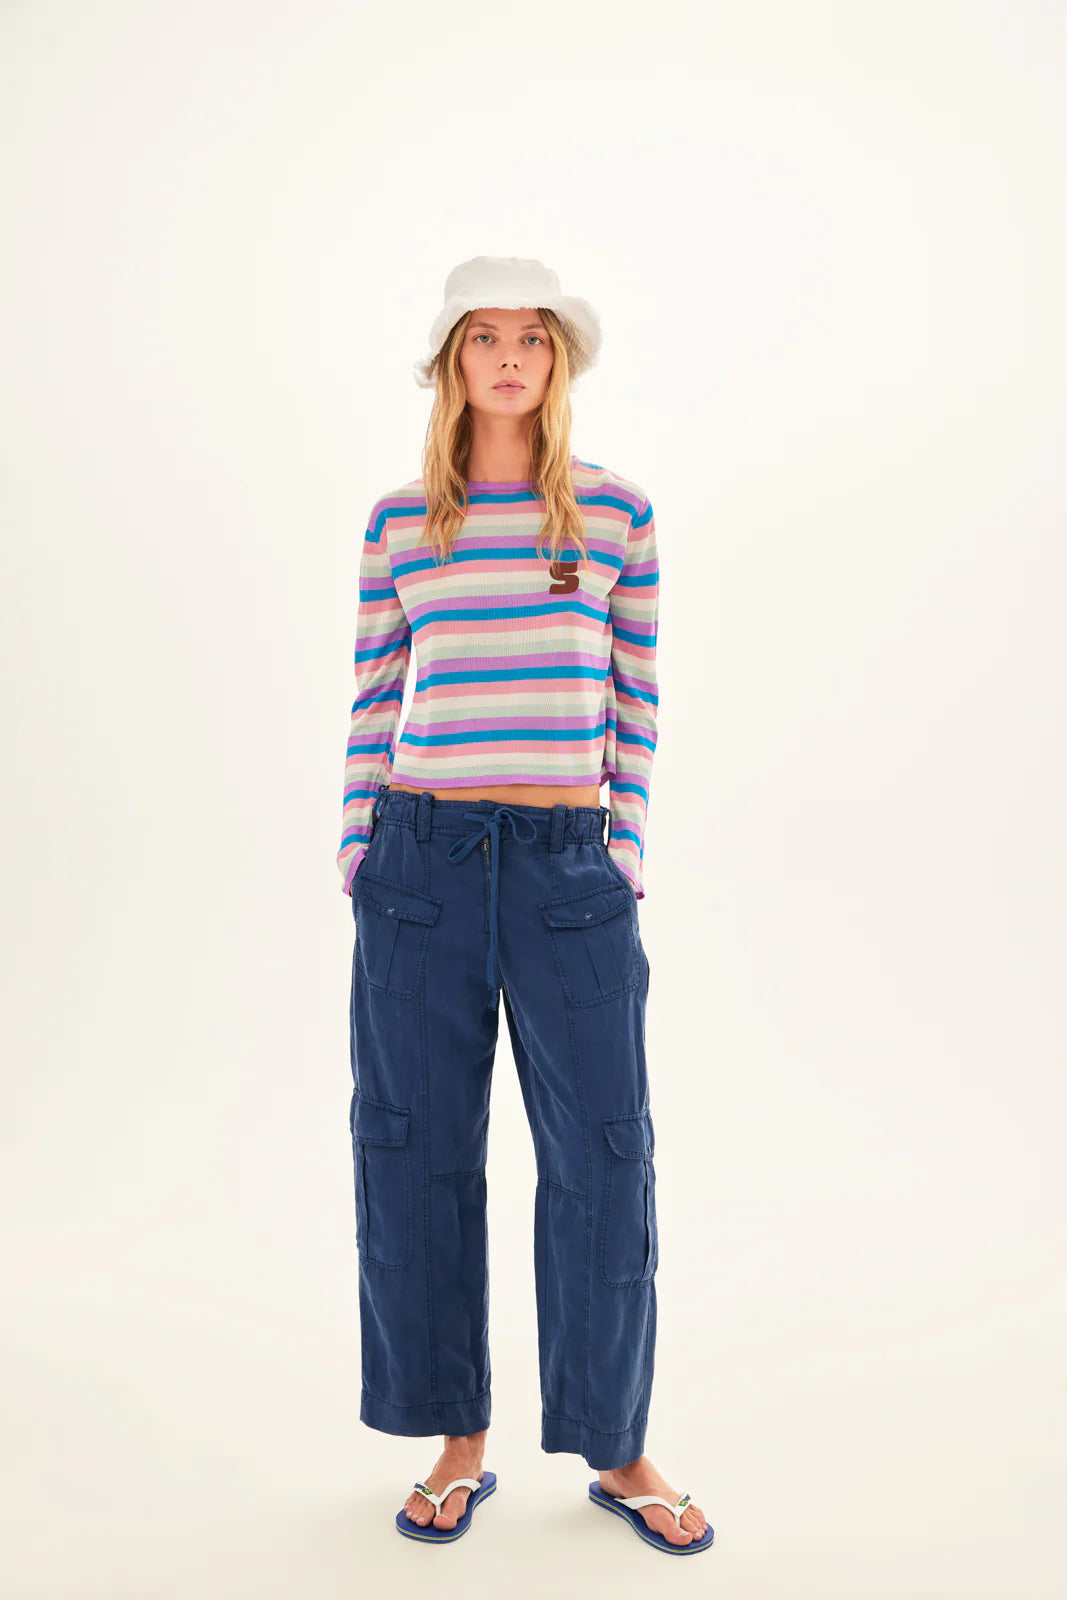 TEX - Sunset Striped Long Sleeve Knit Top